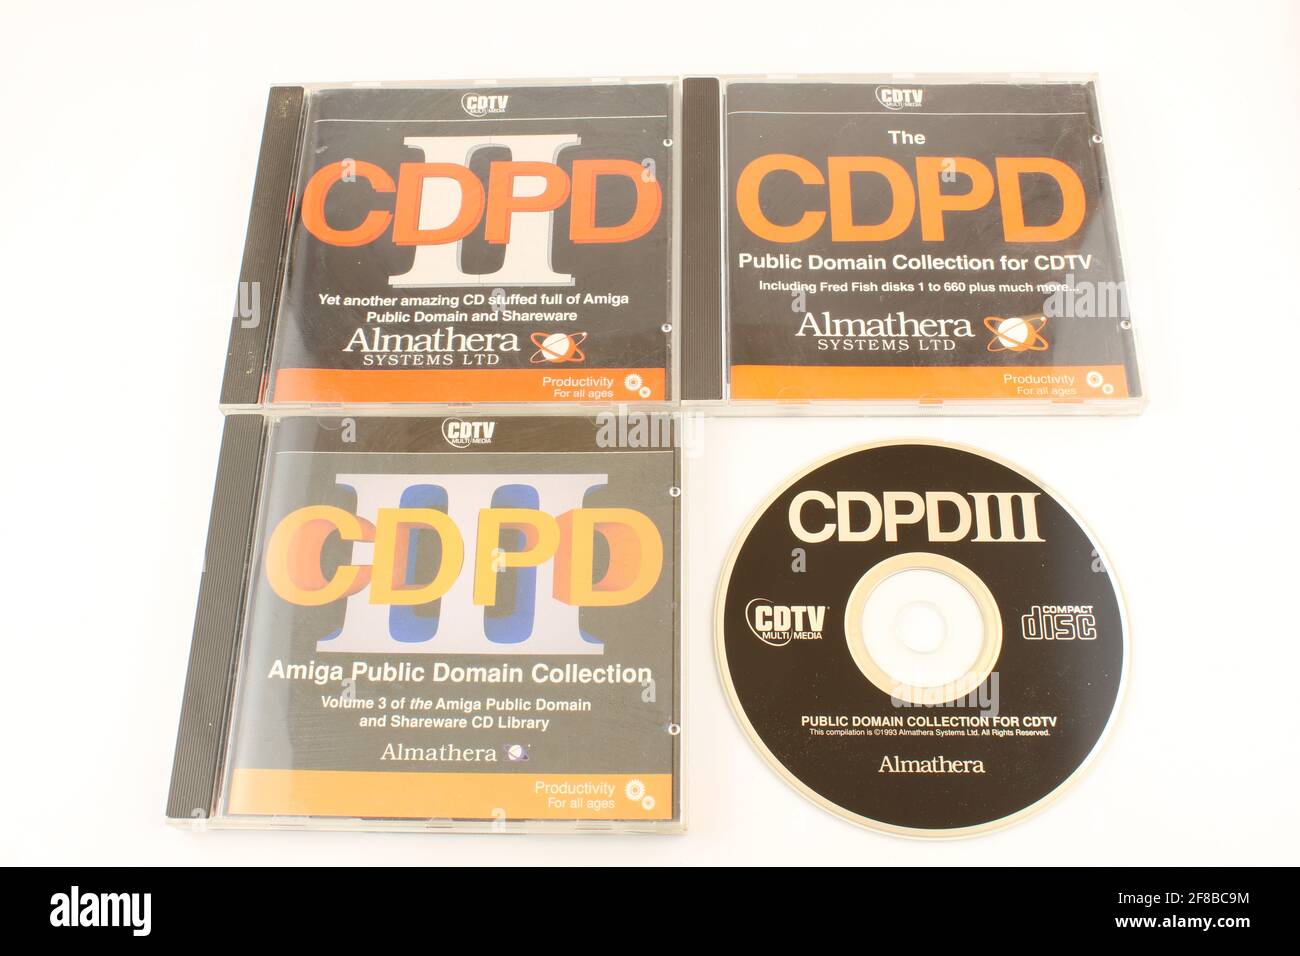 Collection of Amiga public domain and share ware CDs by Almathera systems ltd. Old tech Stock Photo